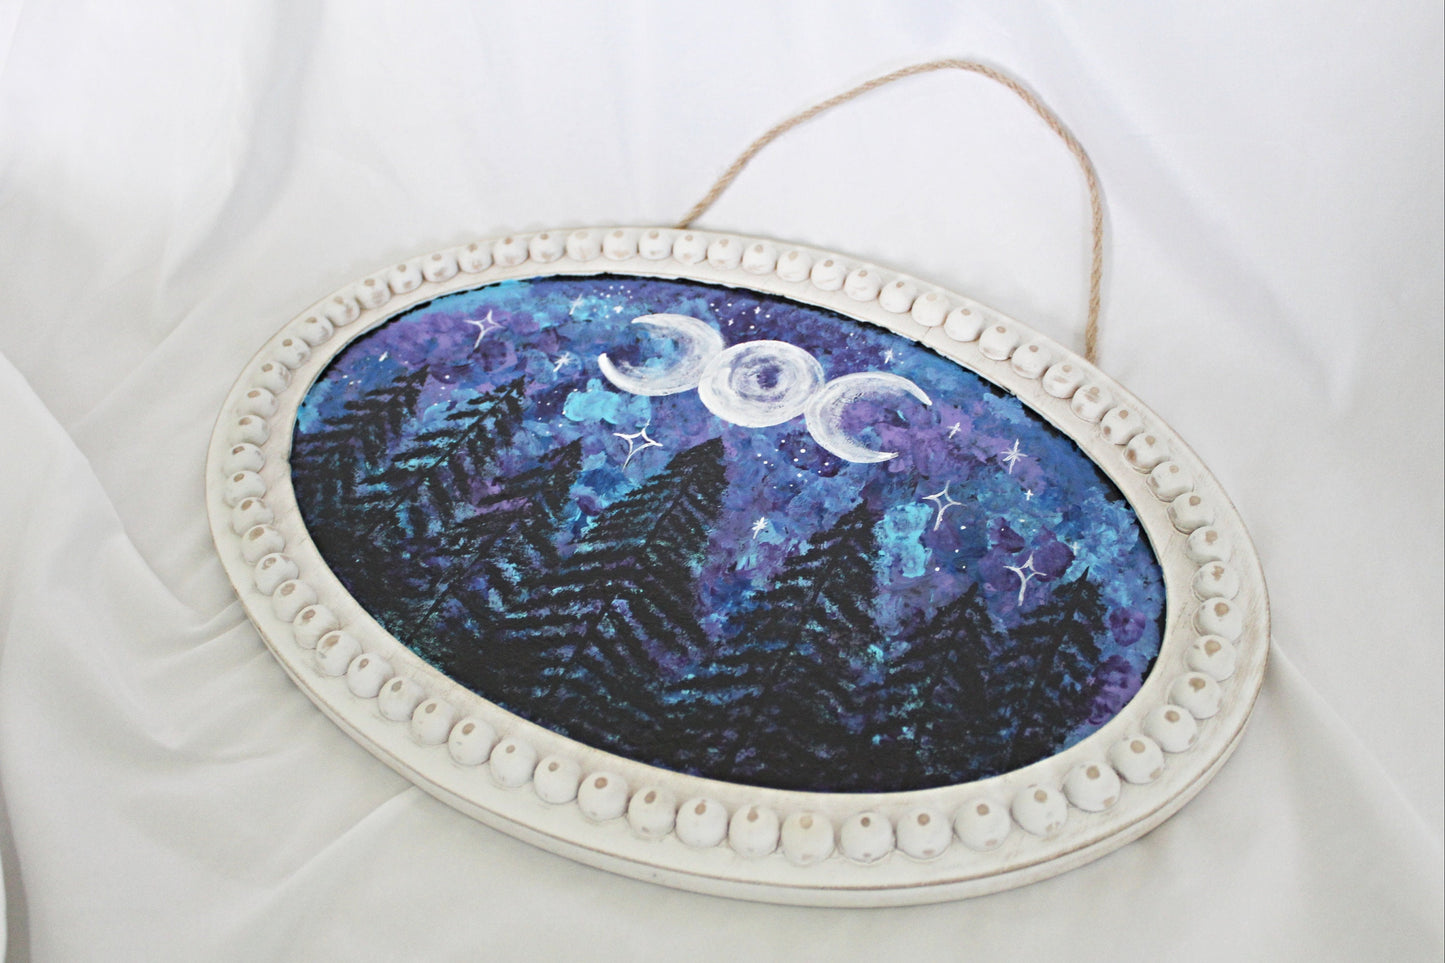 Nighttime Witch Forest Wall Hanging